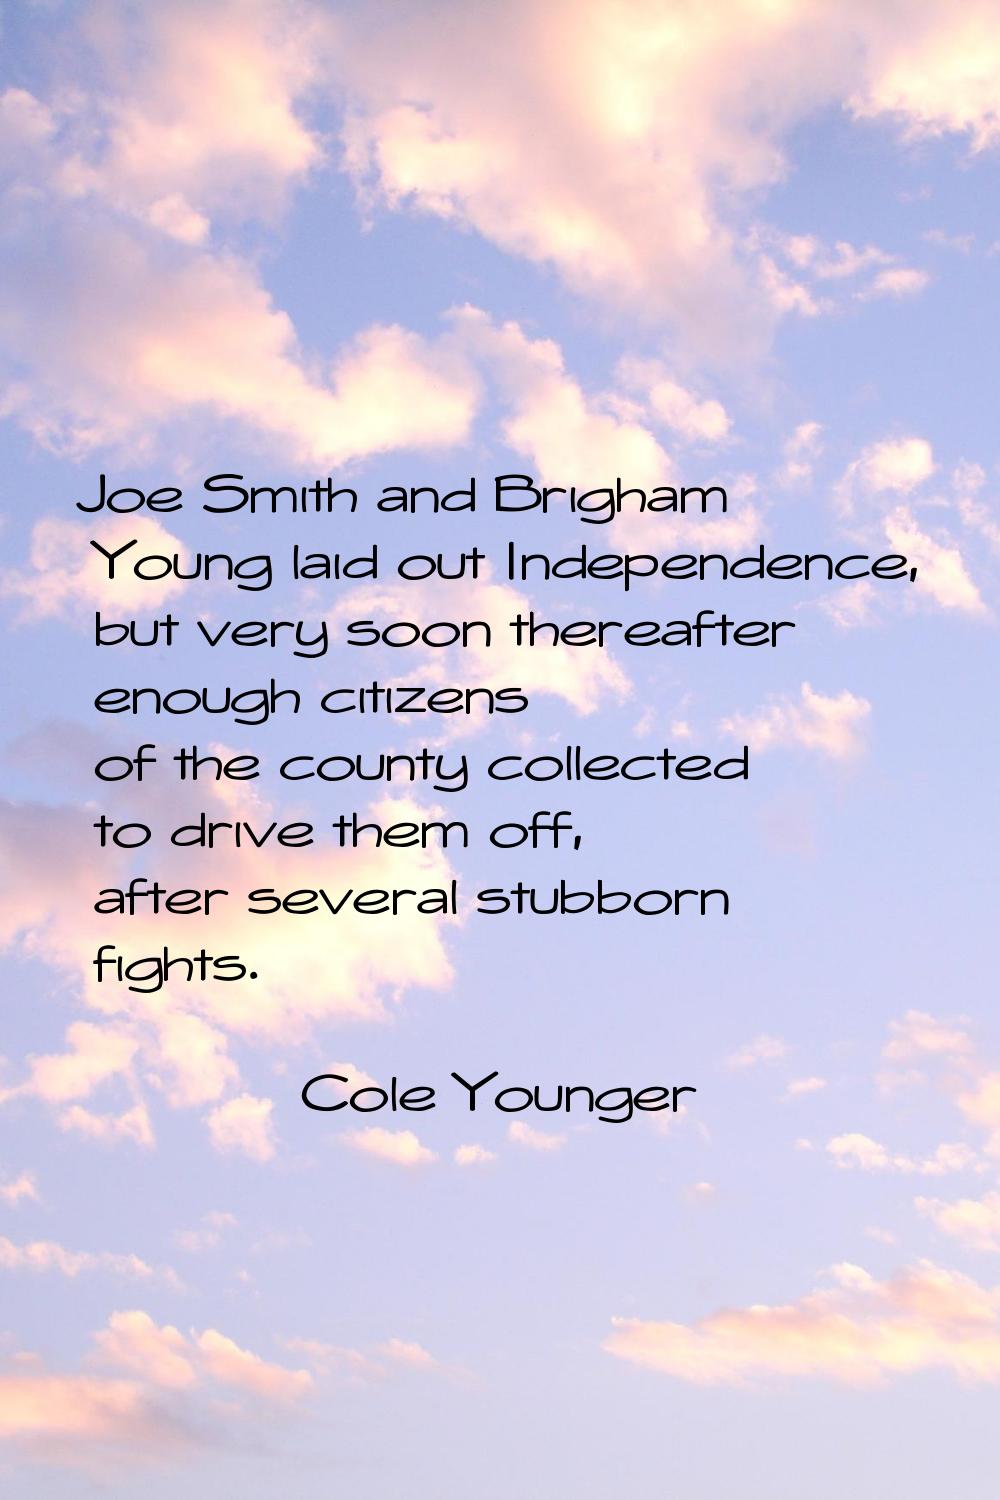 Joe Smith and Brigham Young laid out Independence, but very soon thereafter enough citizens of the 